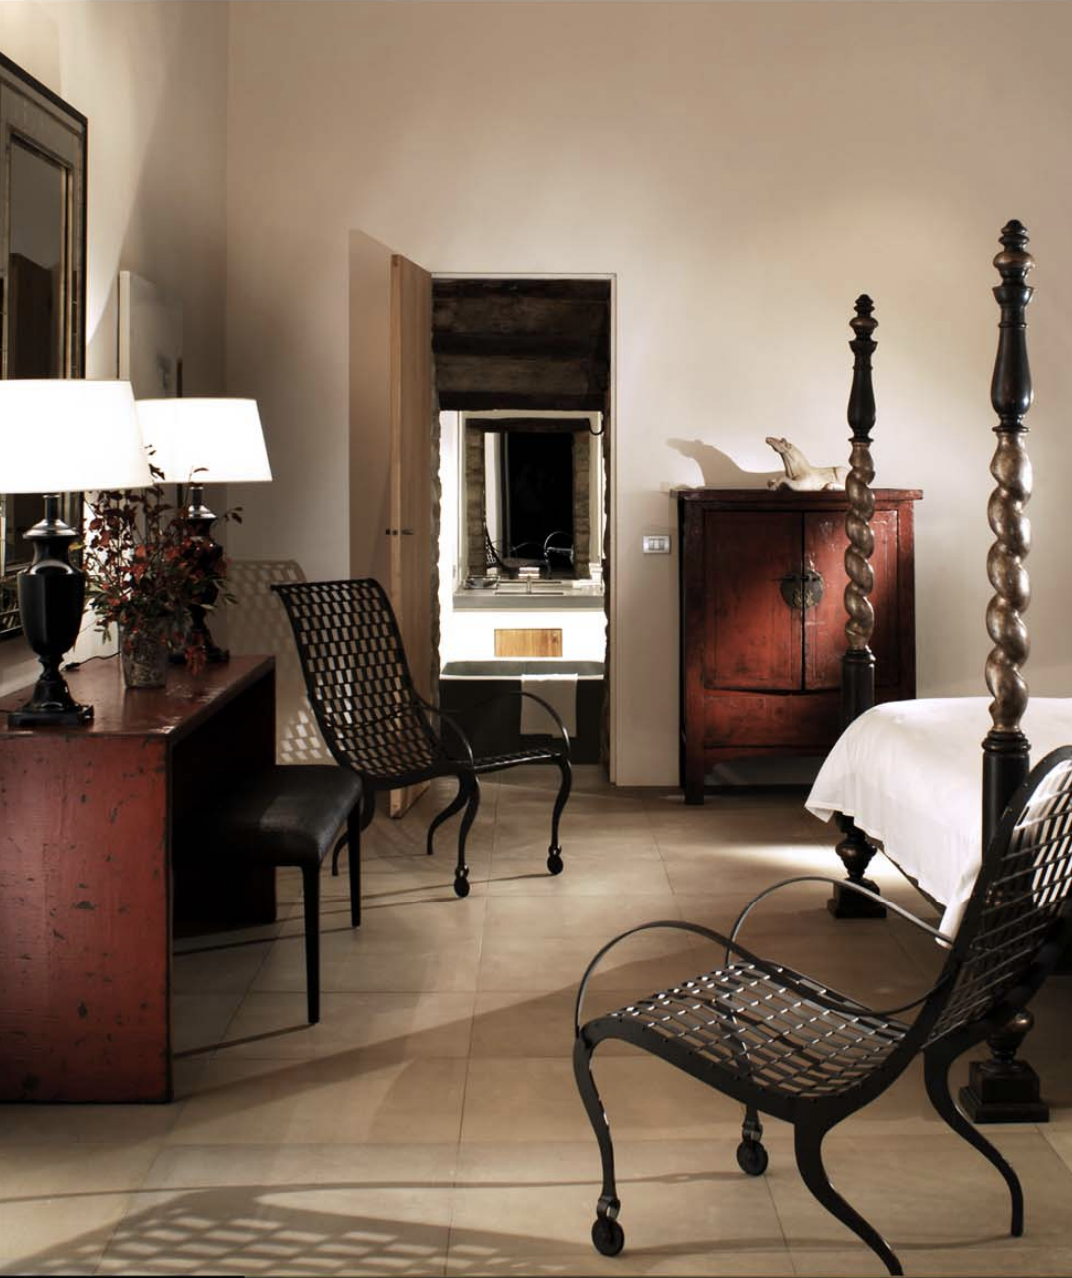 Francis+York+Villa Arrighi | Luxury Villa Rental on the Border of Umbria and Tuscany  00008.png